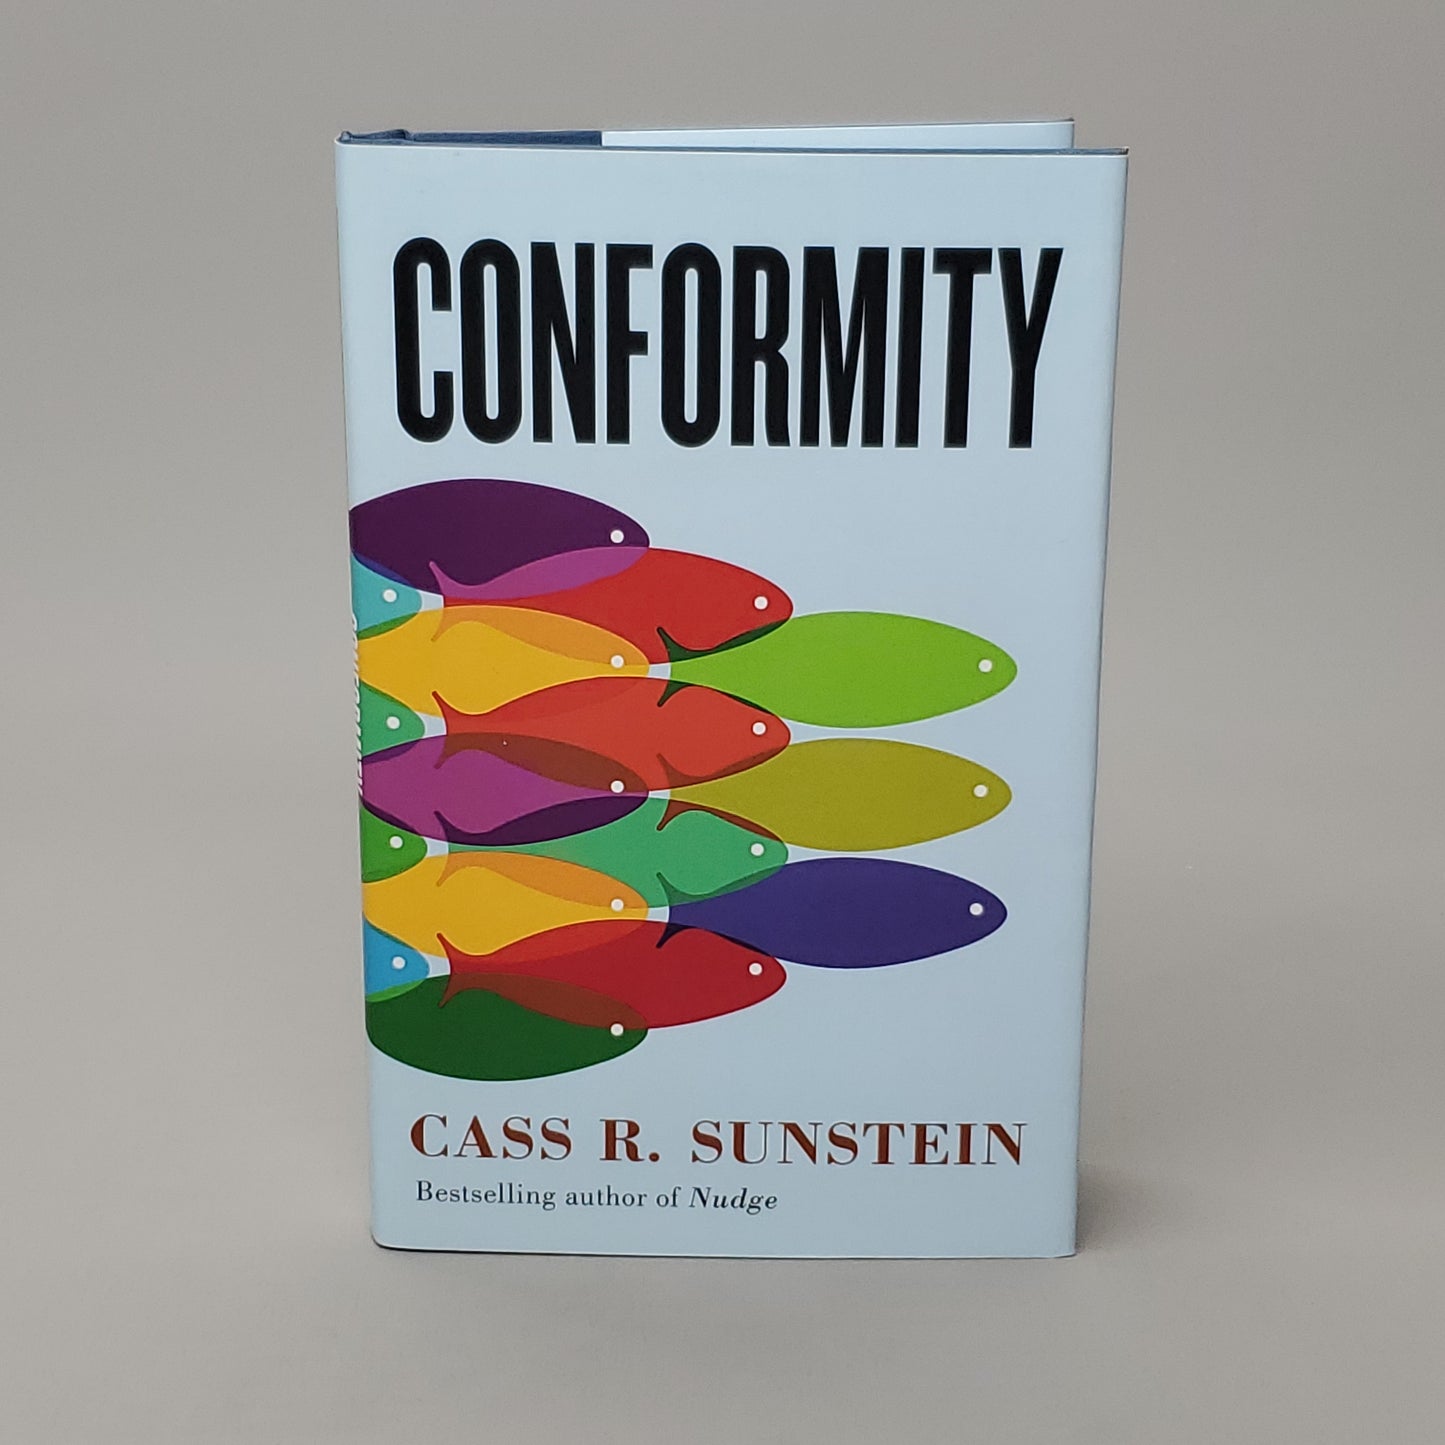 Conformity By Cass R. Sunstein Book Hardcover (New)